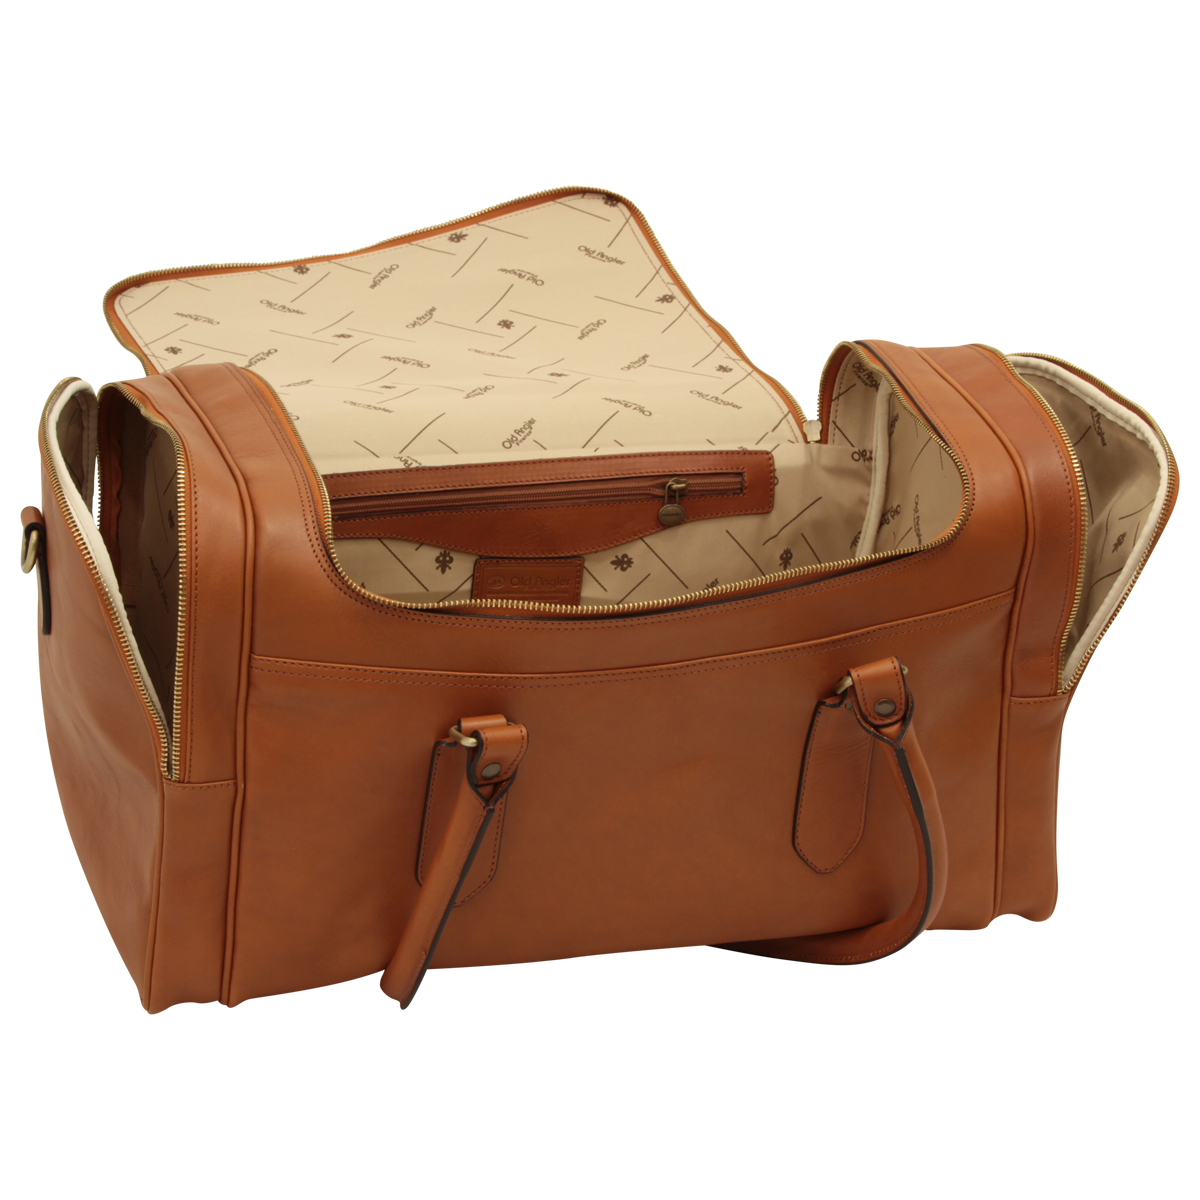 Round Metal Zip Leather Travel Bag - Brown Colonial | 077889CO | EURO | Old Angler Firenze